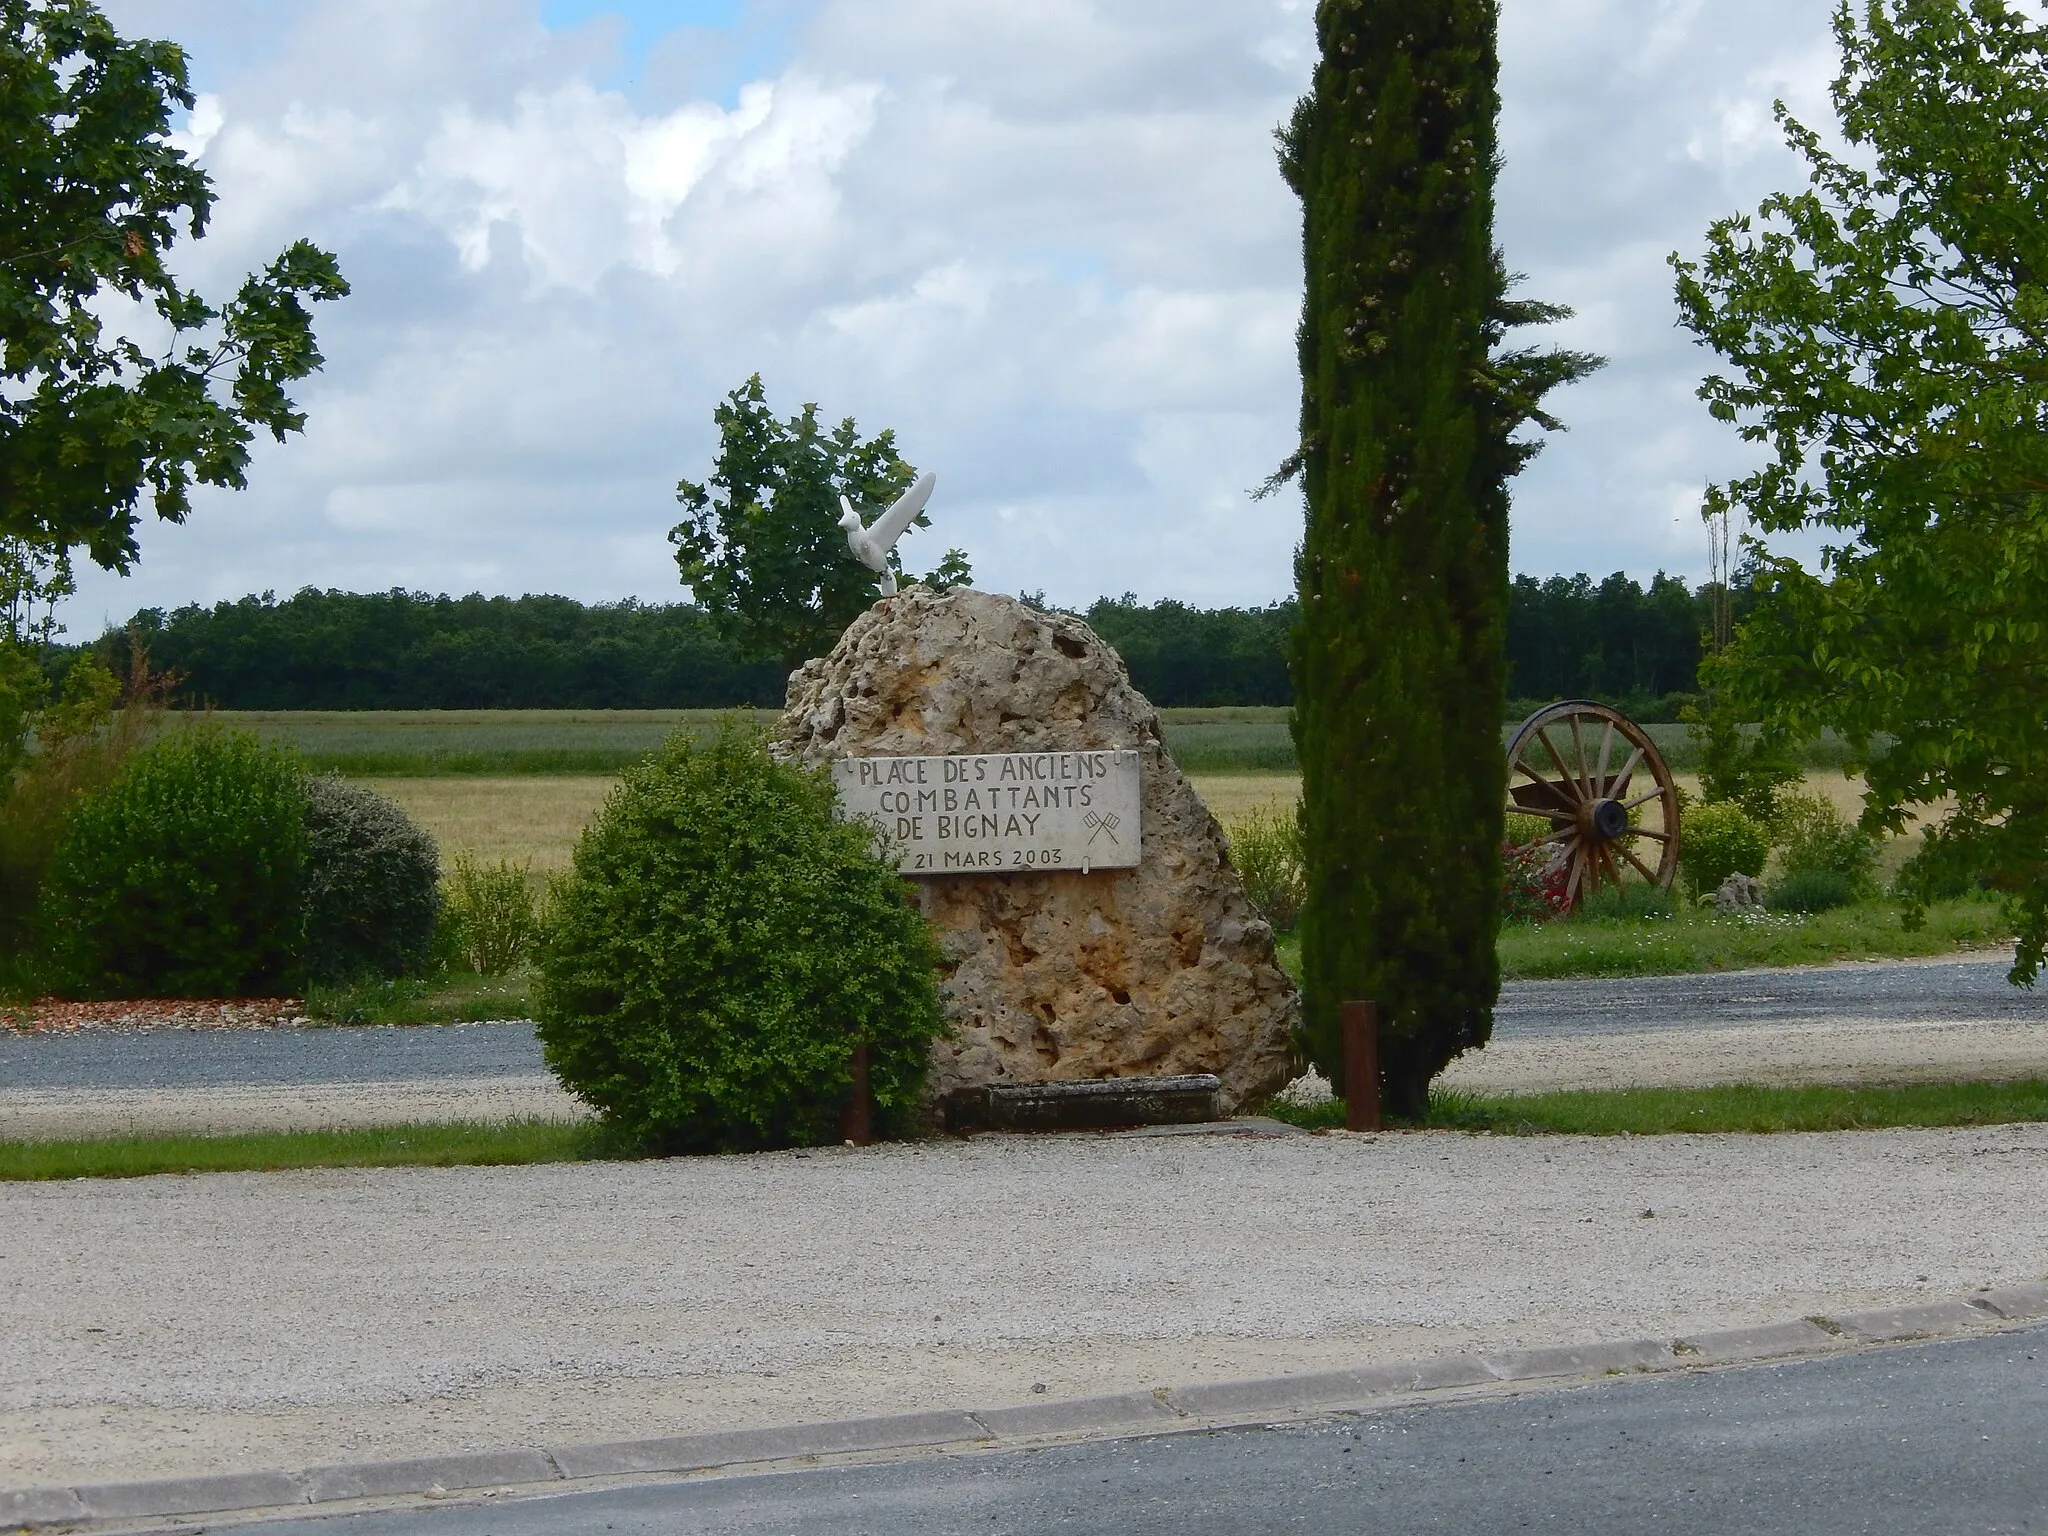 Photo showing: Stone placed on the "Place des Anciens Combattants" (Veterans Square) in Bignay, Charente-Maritime, France. An old wheel can be seen in the background.